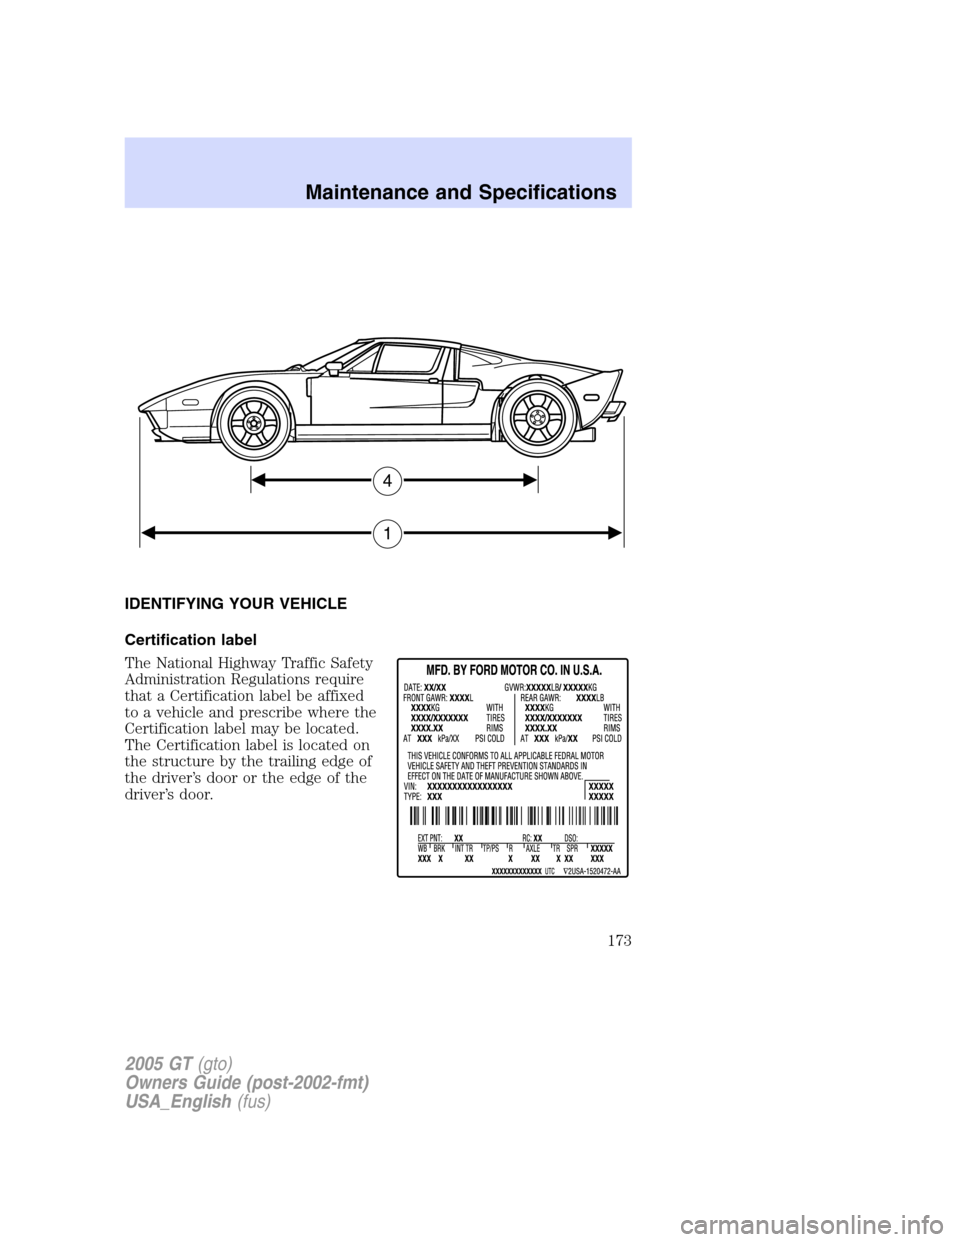 FORD GT 2005 1.G Owners Manual 
IDENTIFYING YOUR VEHICLE
Certification label
The National Highway Traffic Safety
Administration Regulations require
that a Certification label be affixed
to a vehicle and prescribe where the
Certific